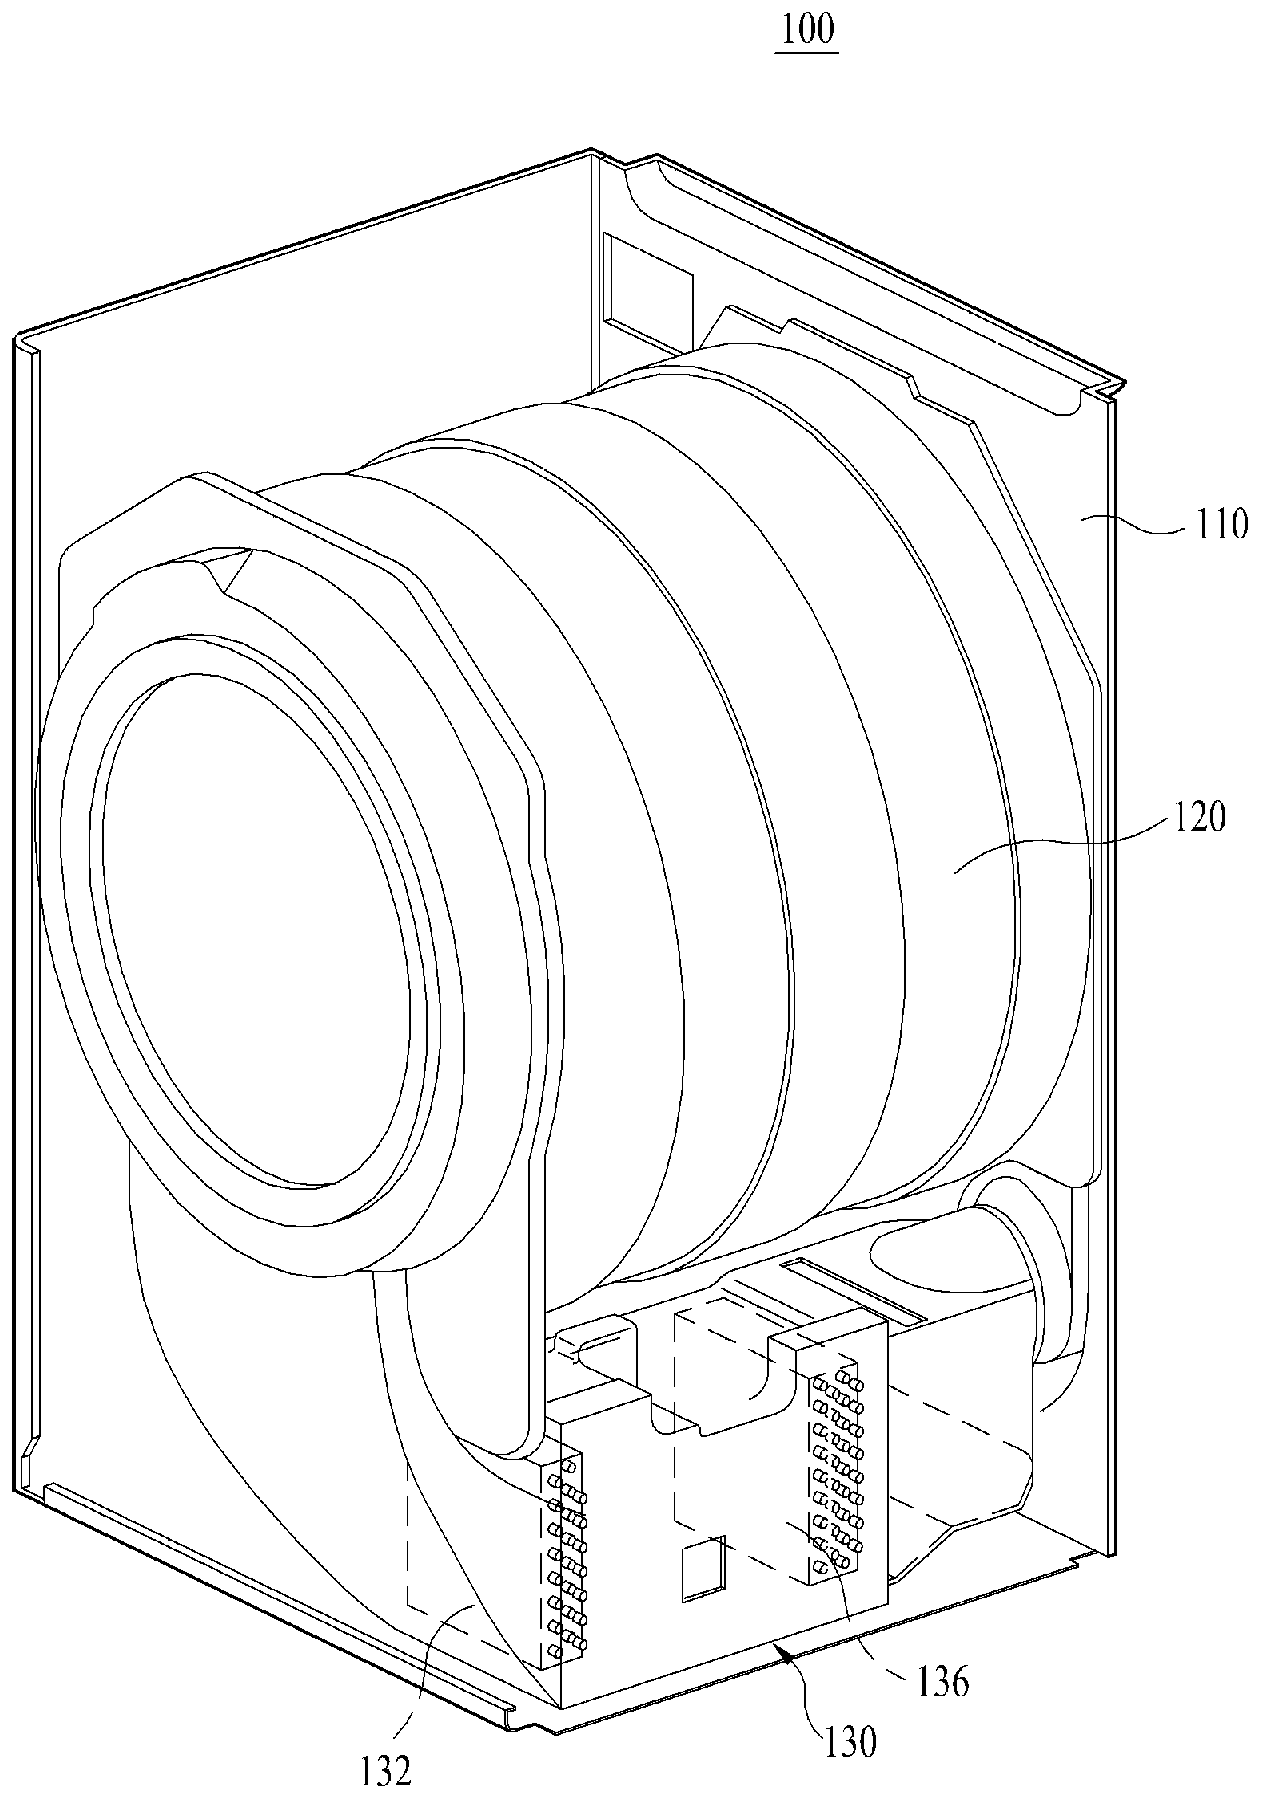 Method for controlling the operation of a dryer